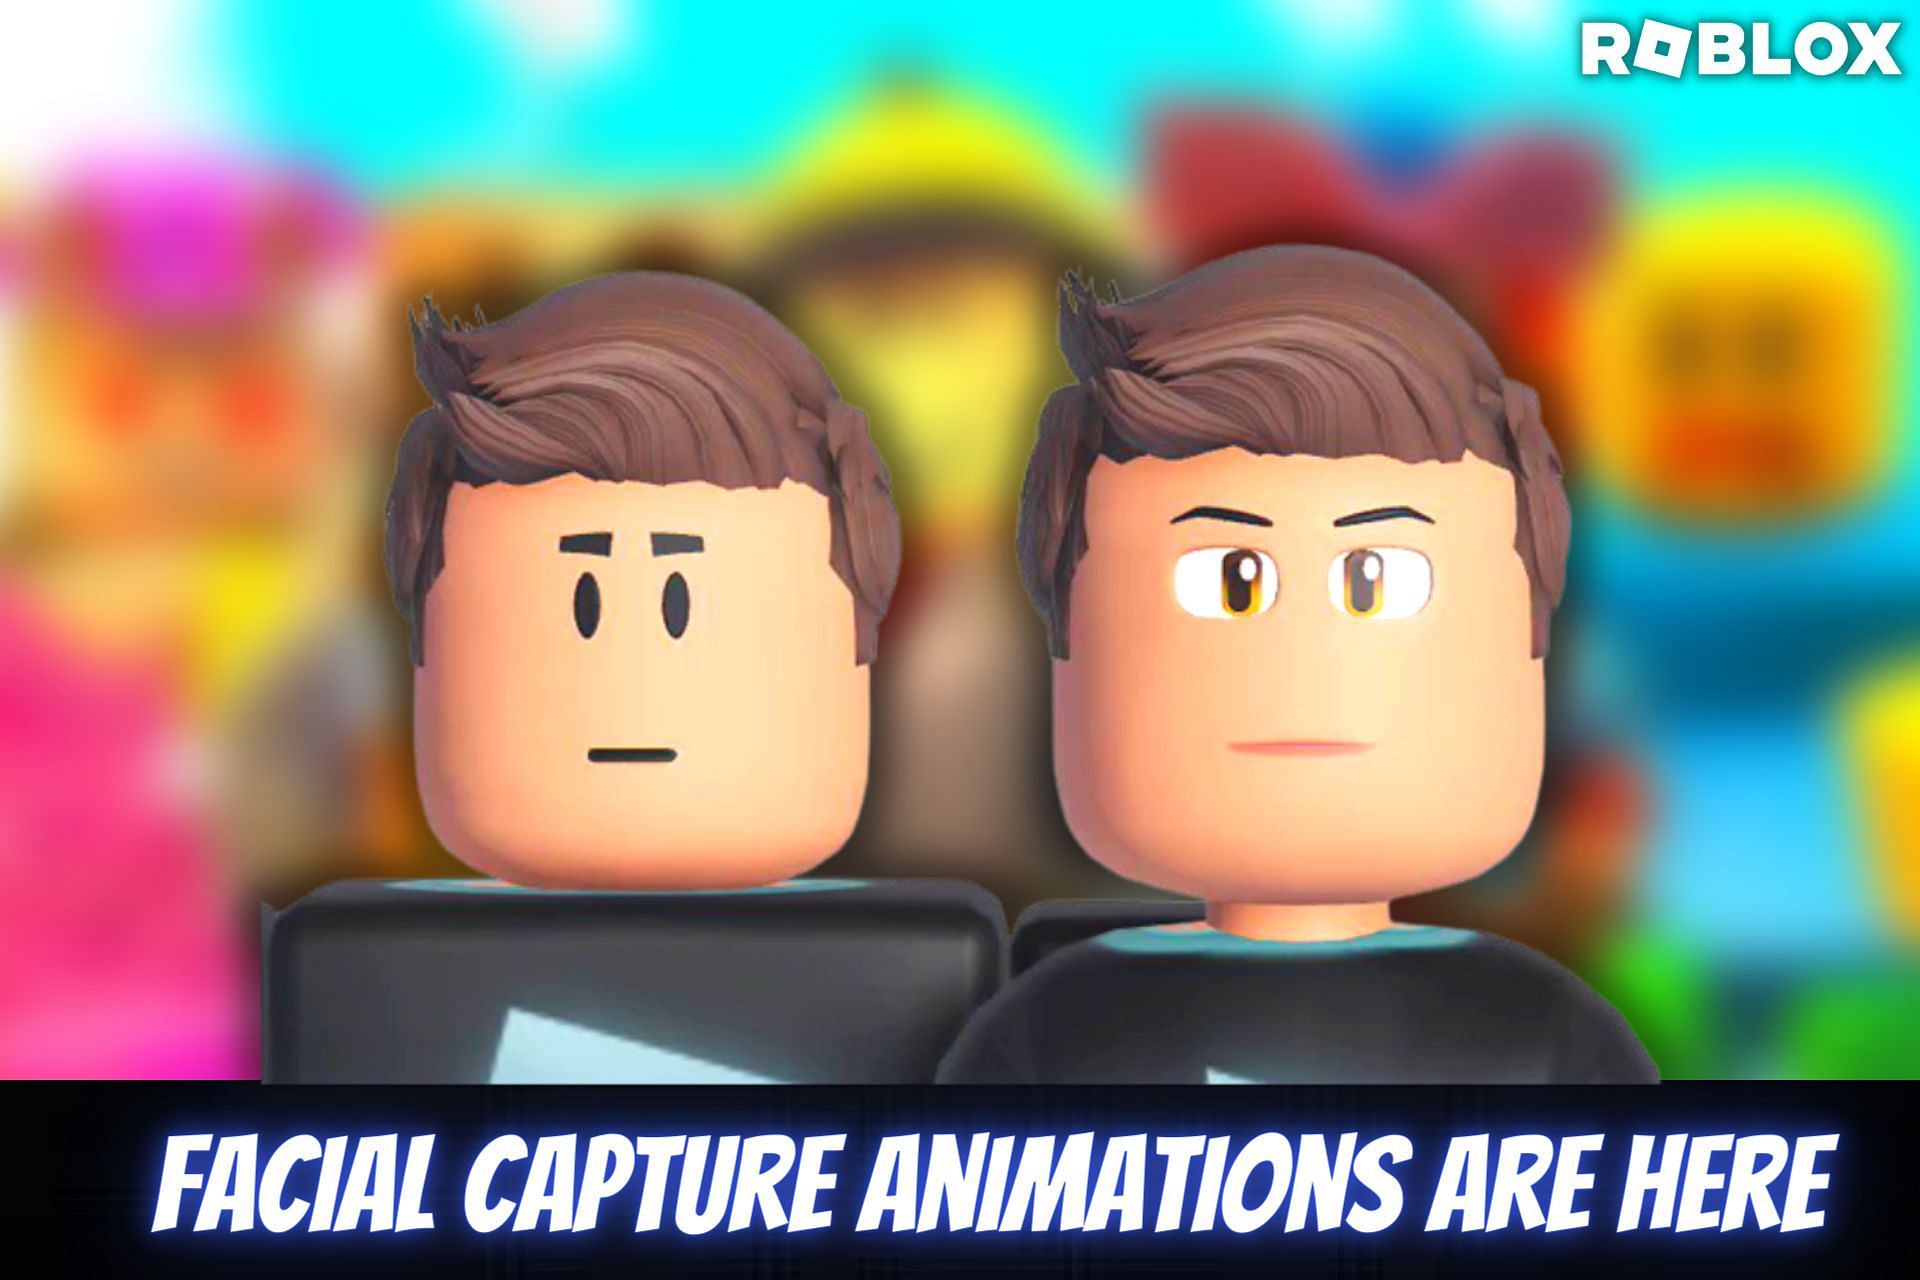 What is the Roblox Eating Glue Face Avatar